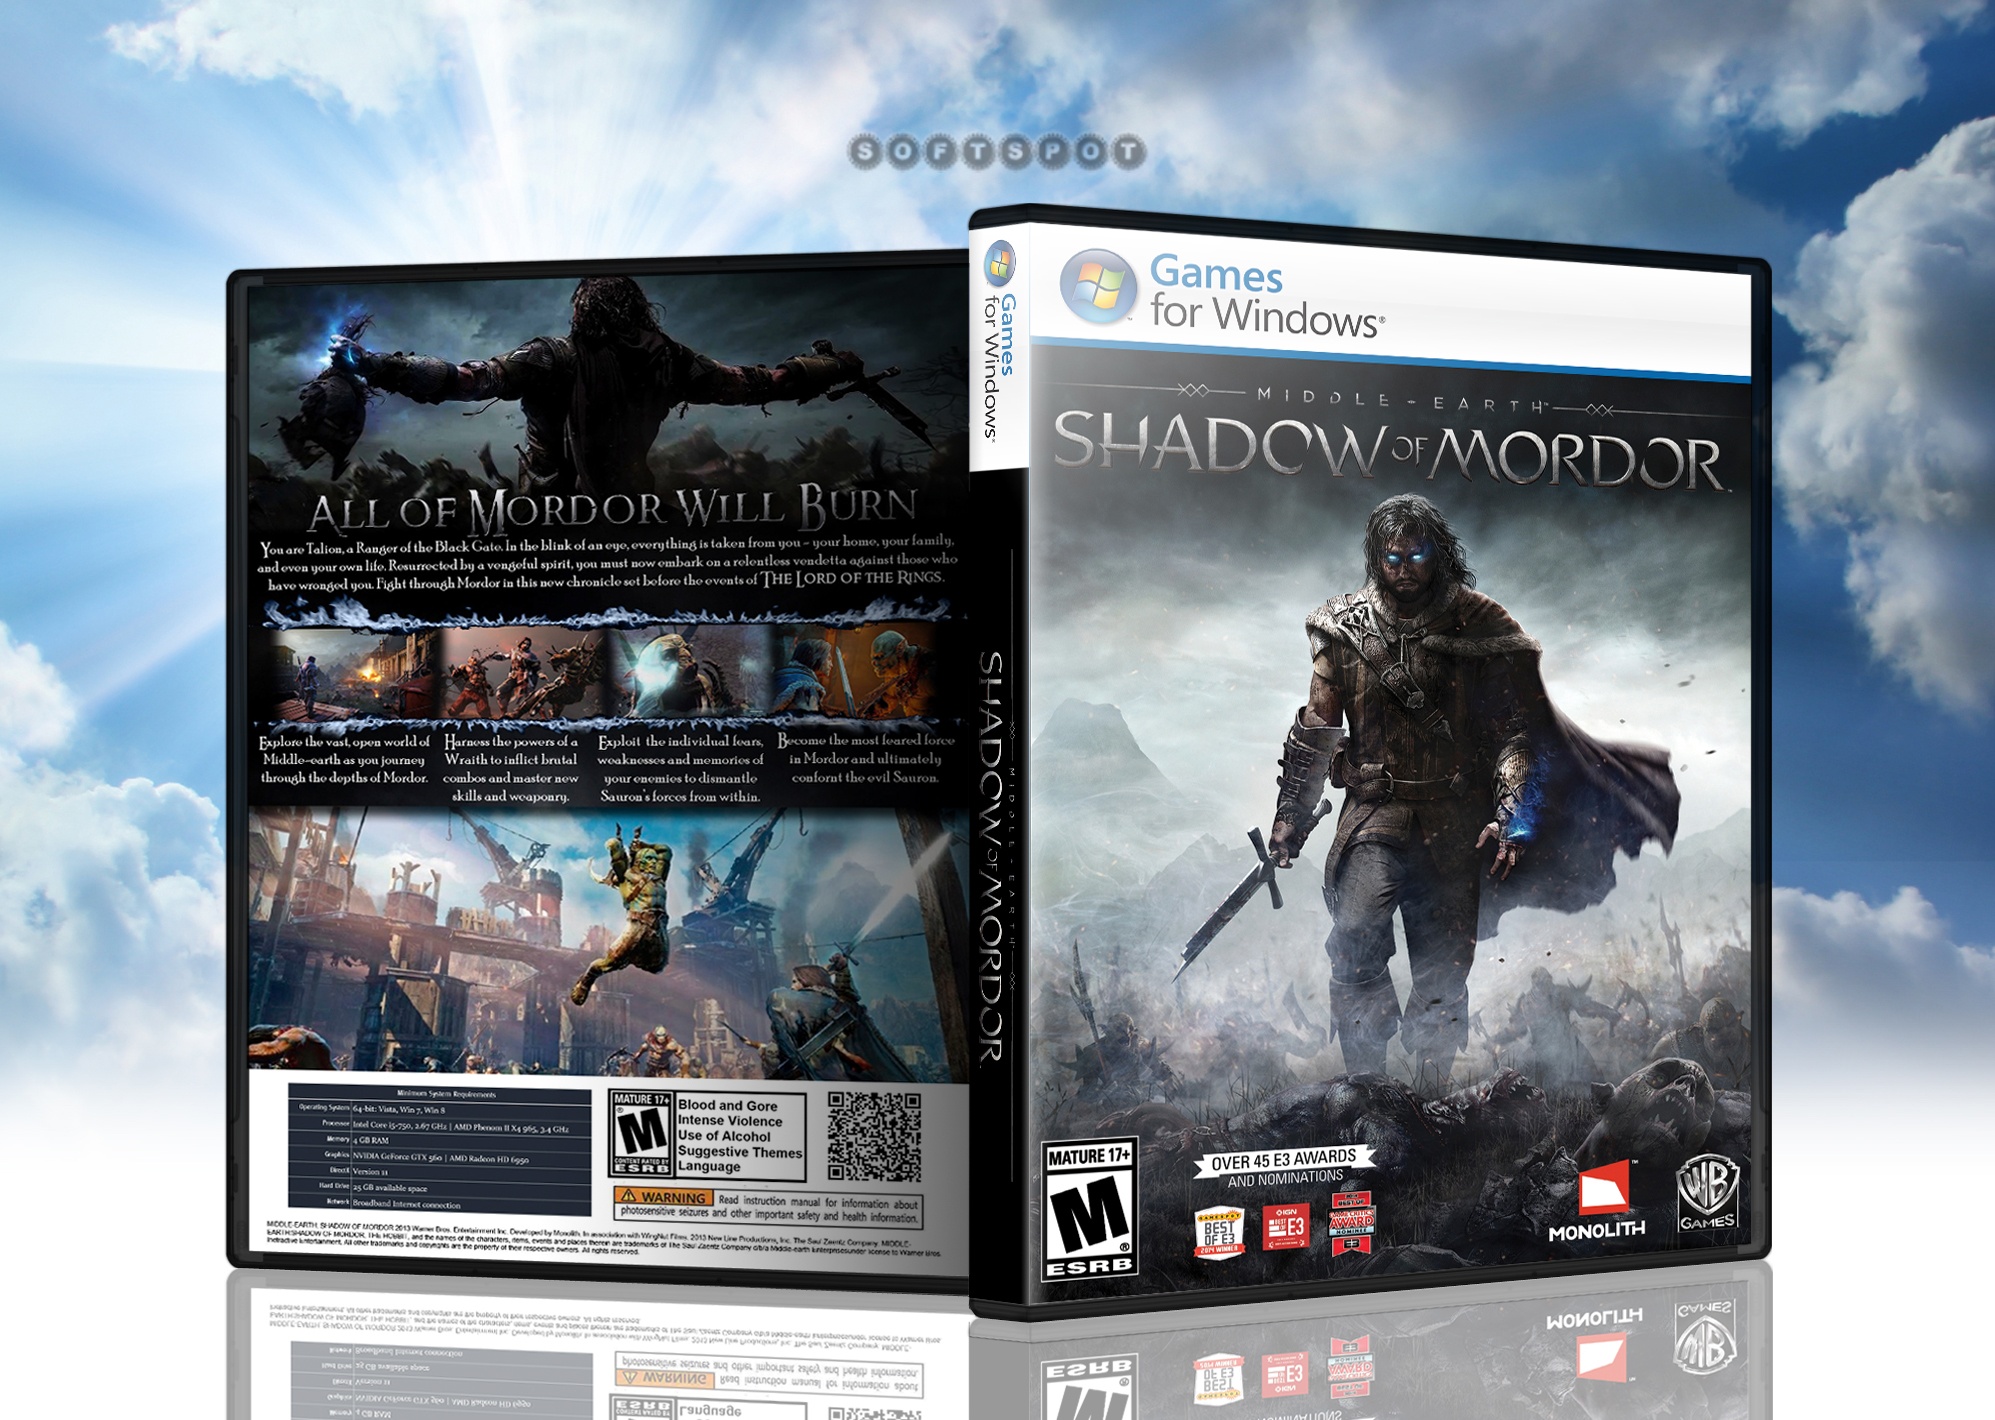 middle-earth: shadow of mordor box cover